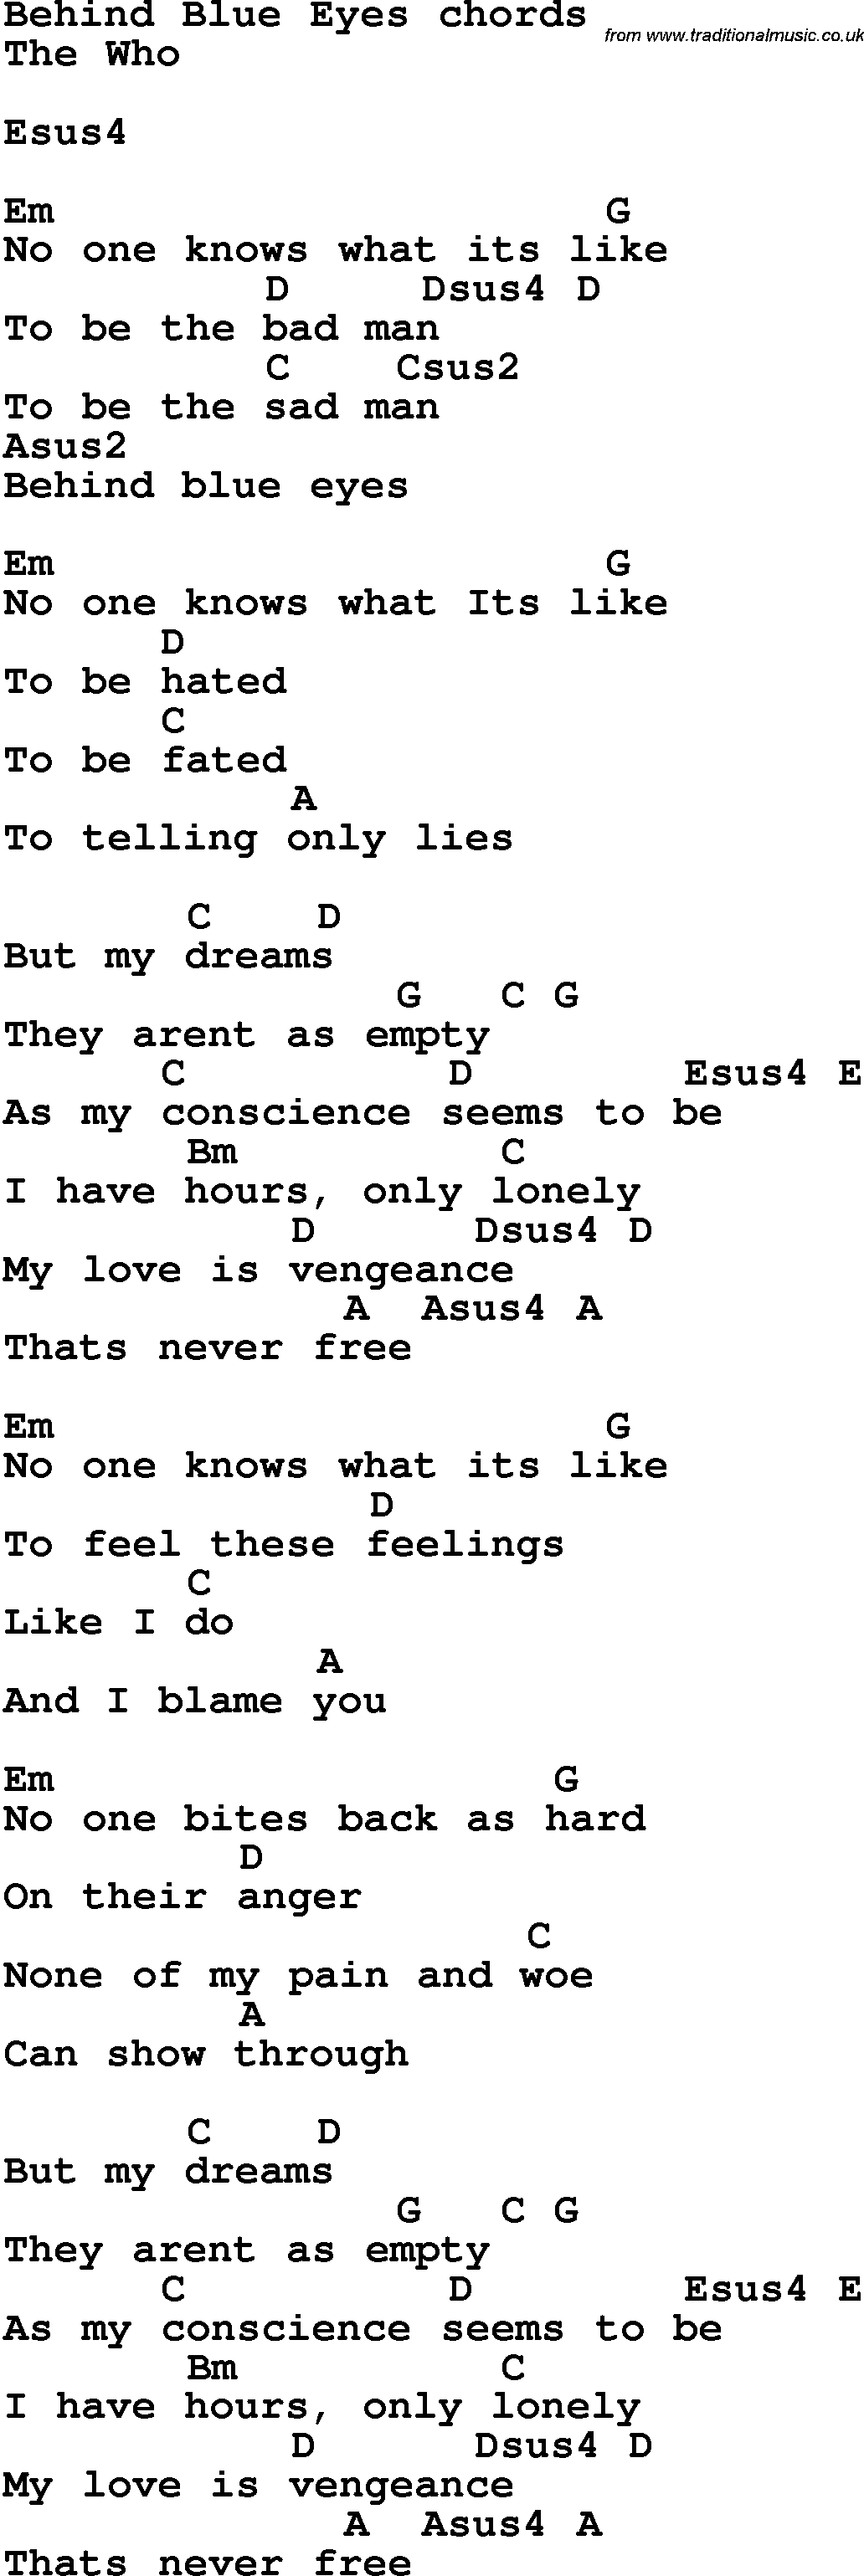 Song Lyrics with guitar chords for Behind Blue Eyes